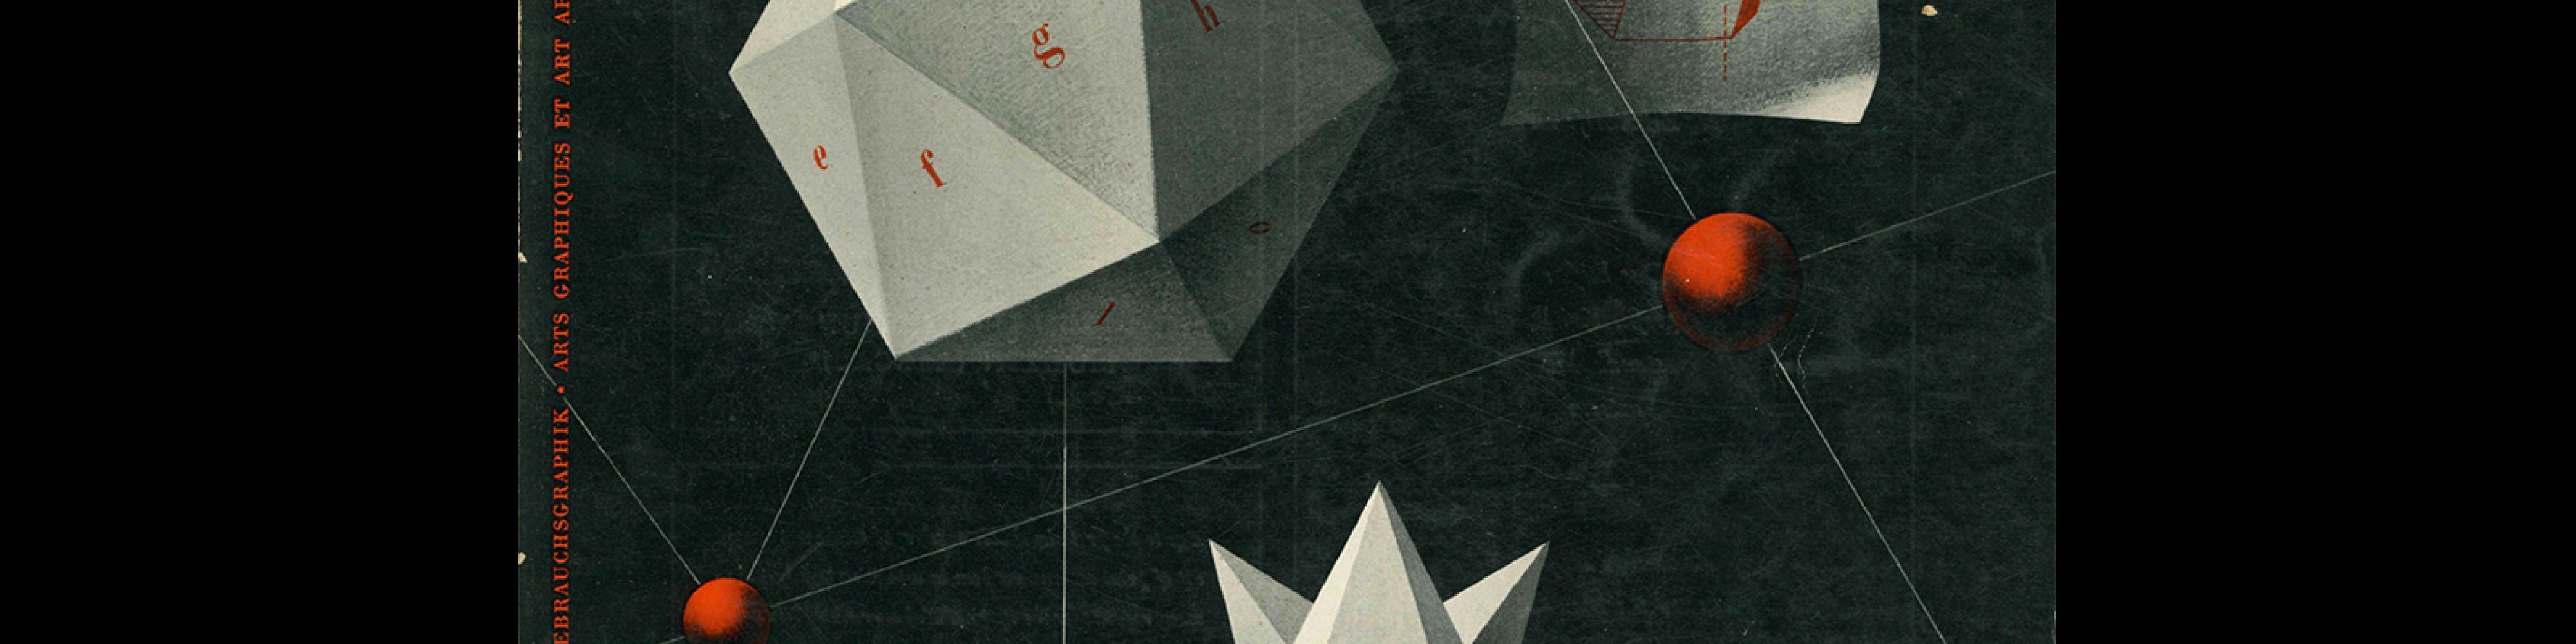 Graphis 22, 1948. Cover design by Jacques Nathan-Garamond